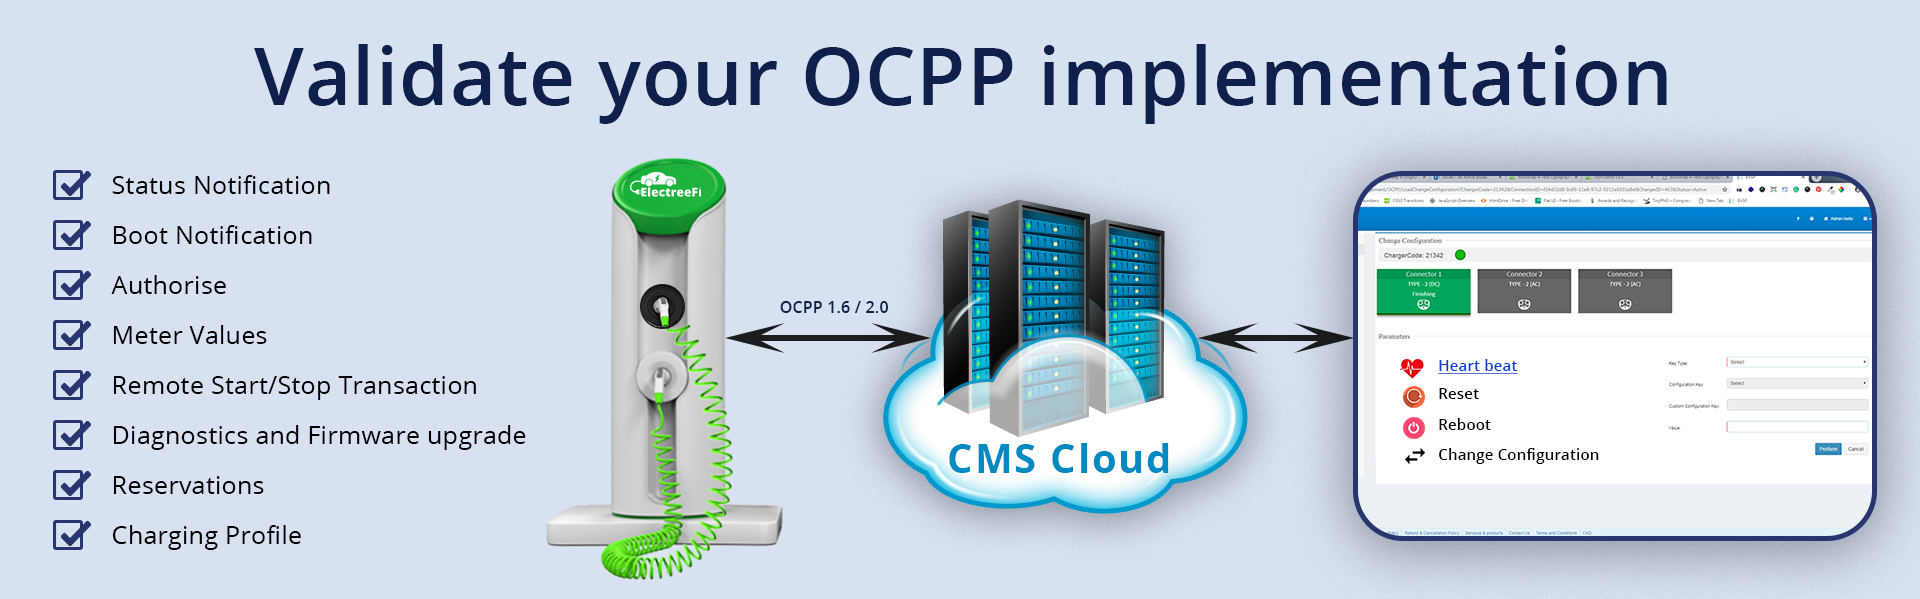 Validate your OCPP implementation 